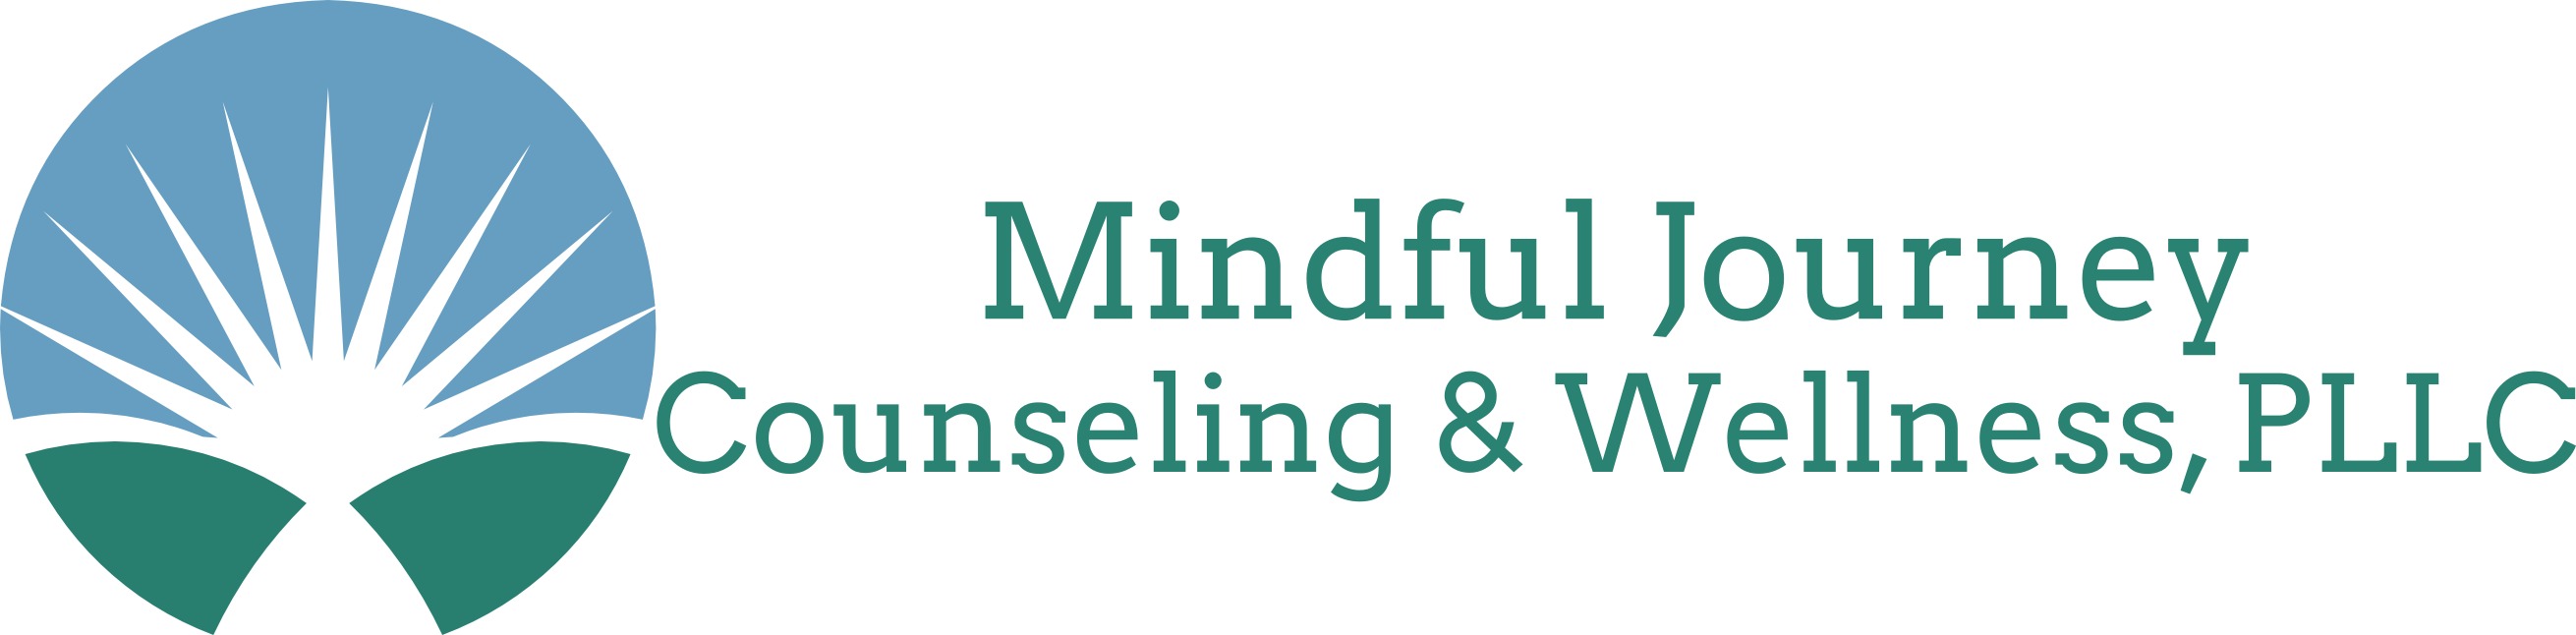 Mindful Journey Counseling & Wellness, PLLC